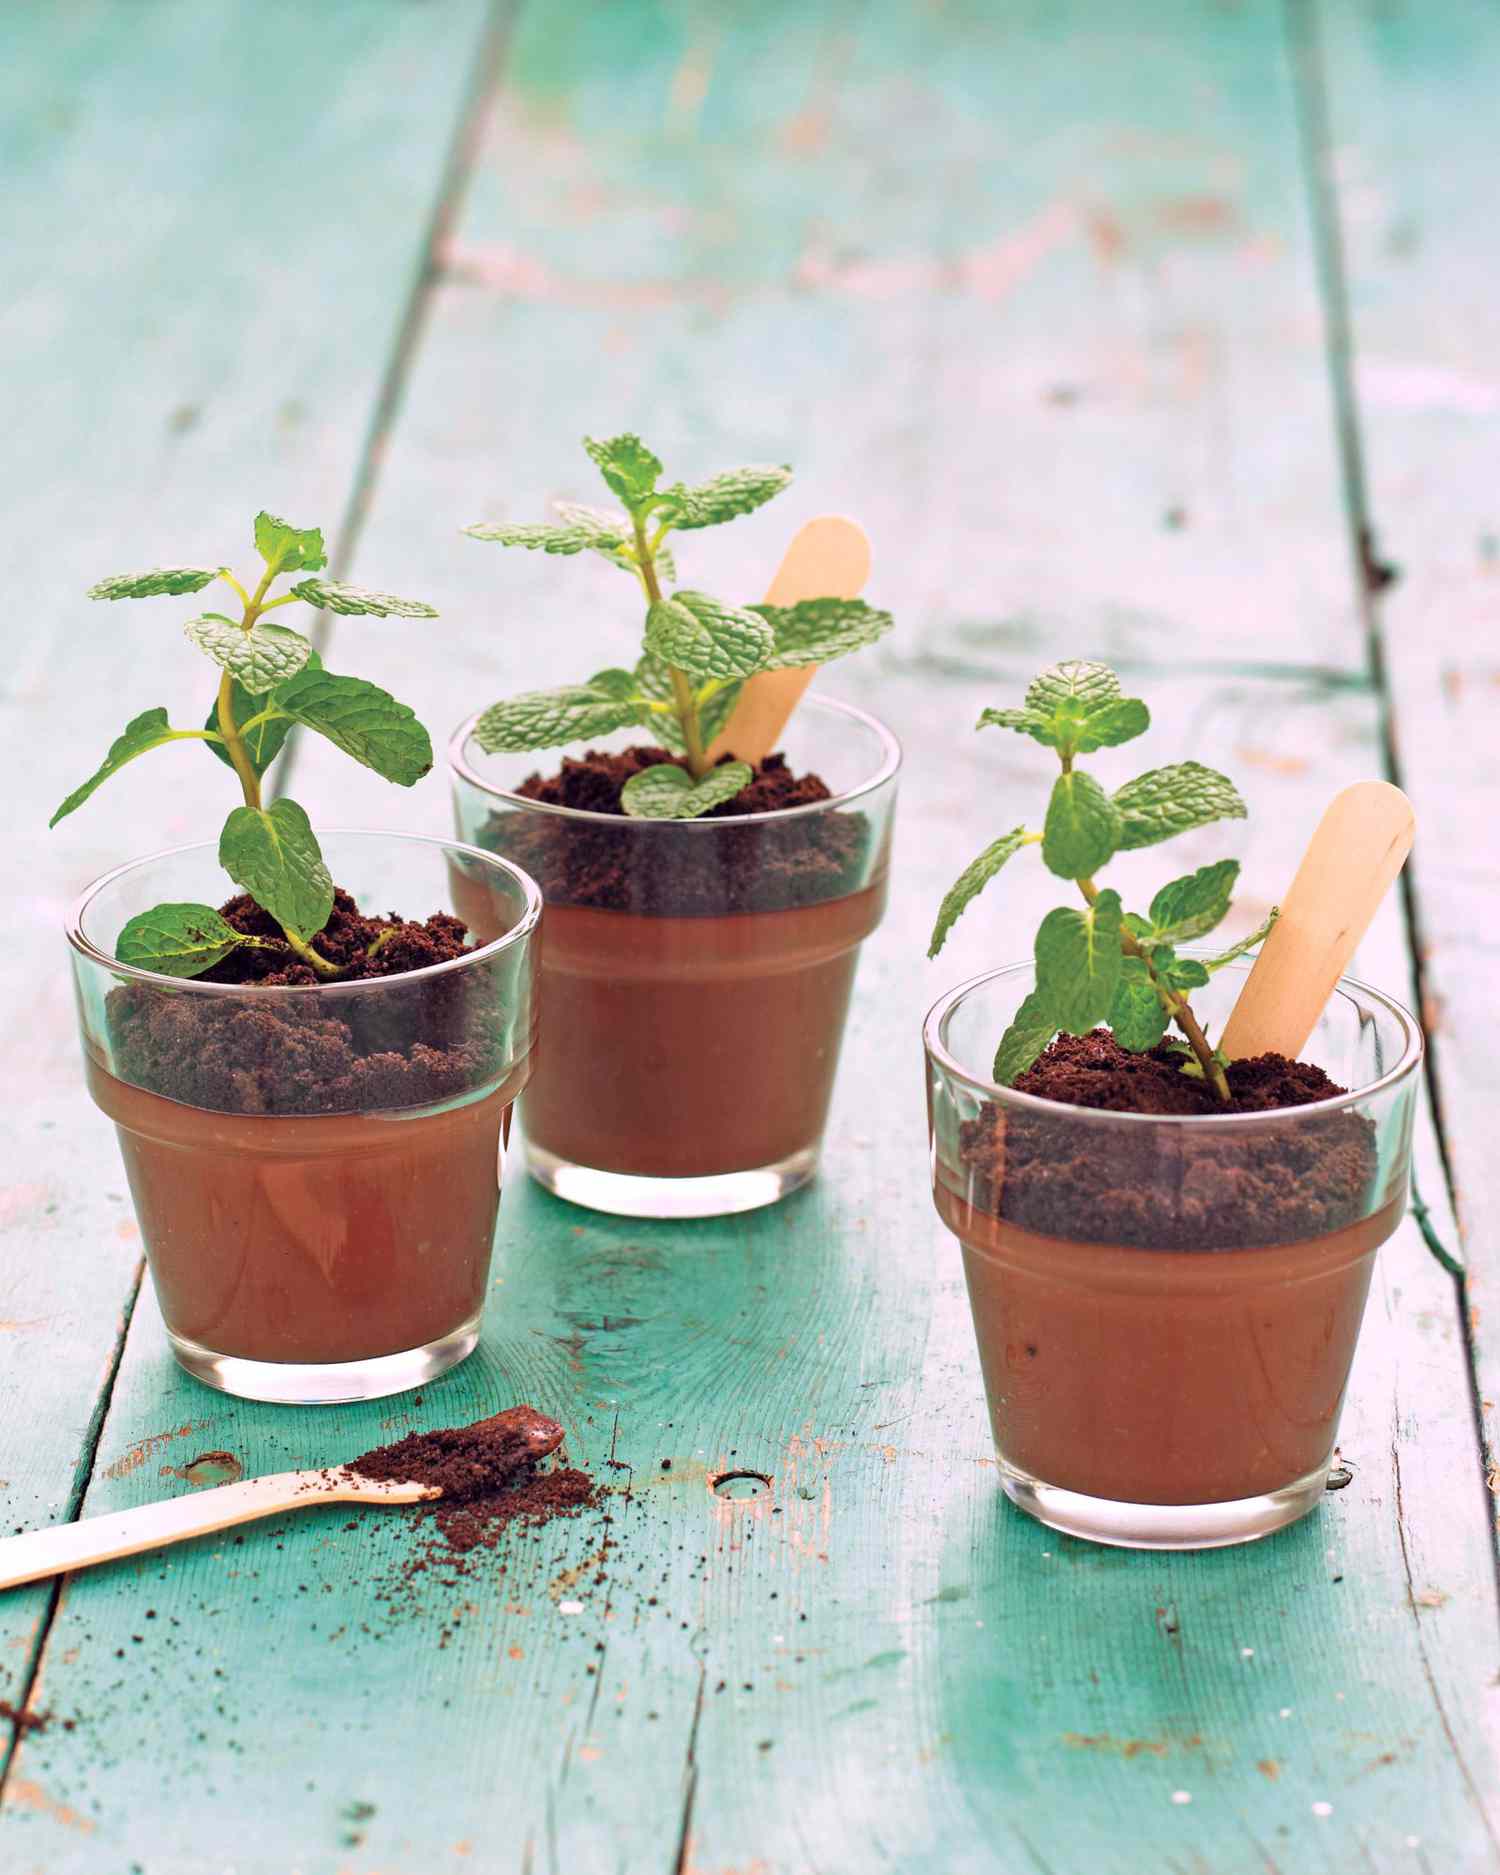 Potted Chocolate-Mint Puddings